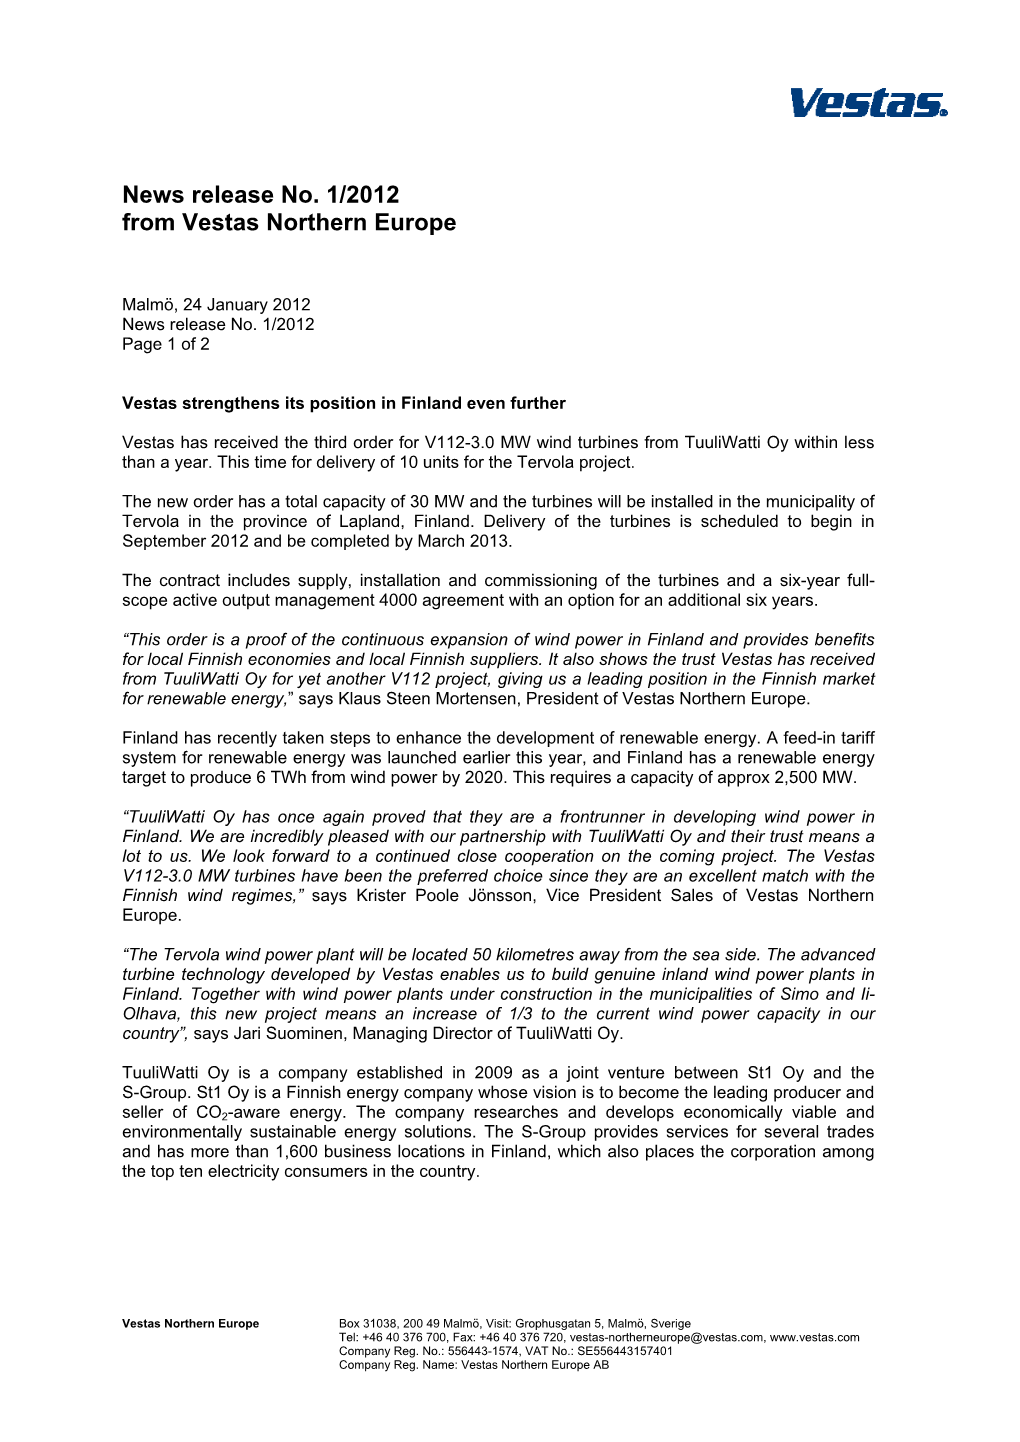 News Release No. 1/2012 from Vestas Northern Europe